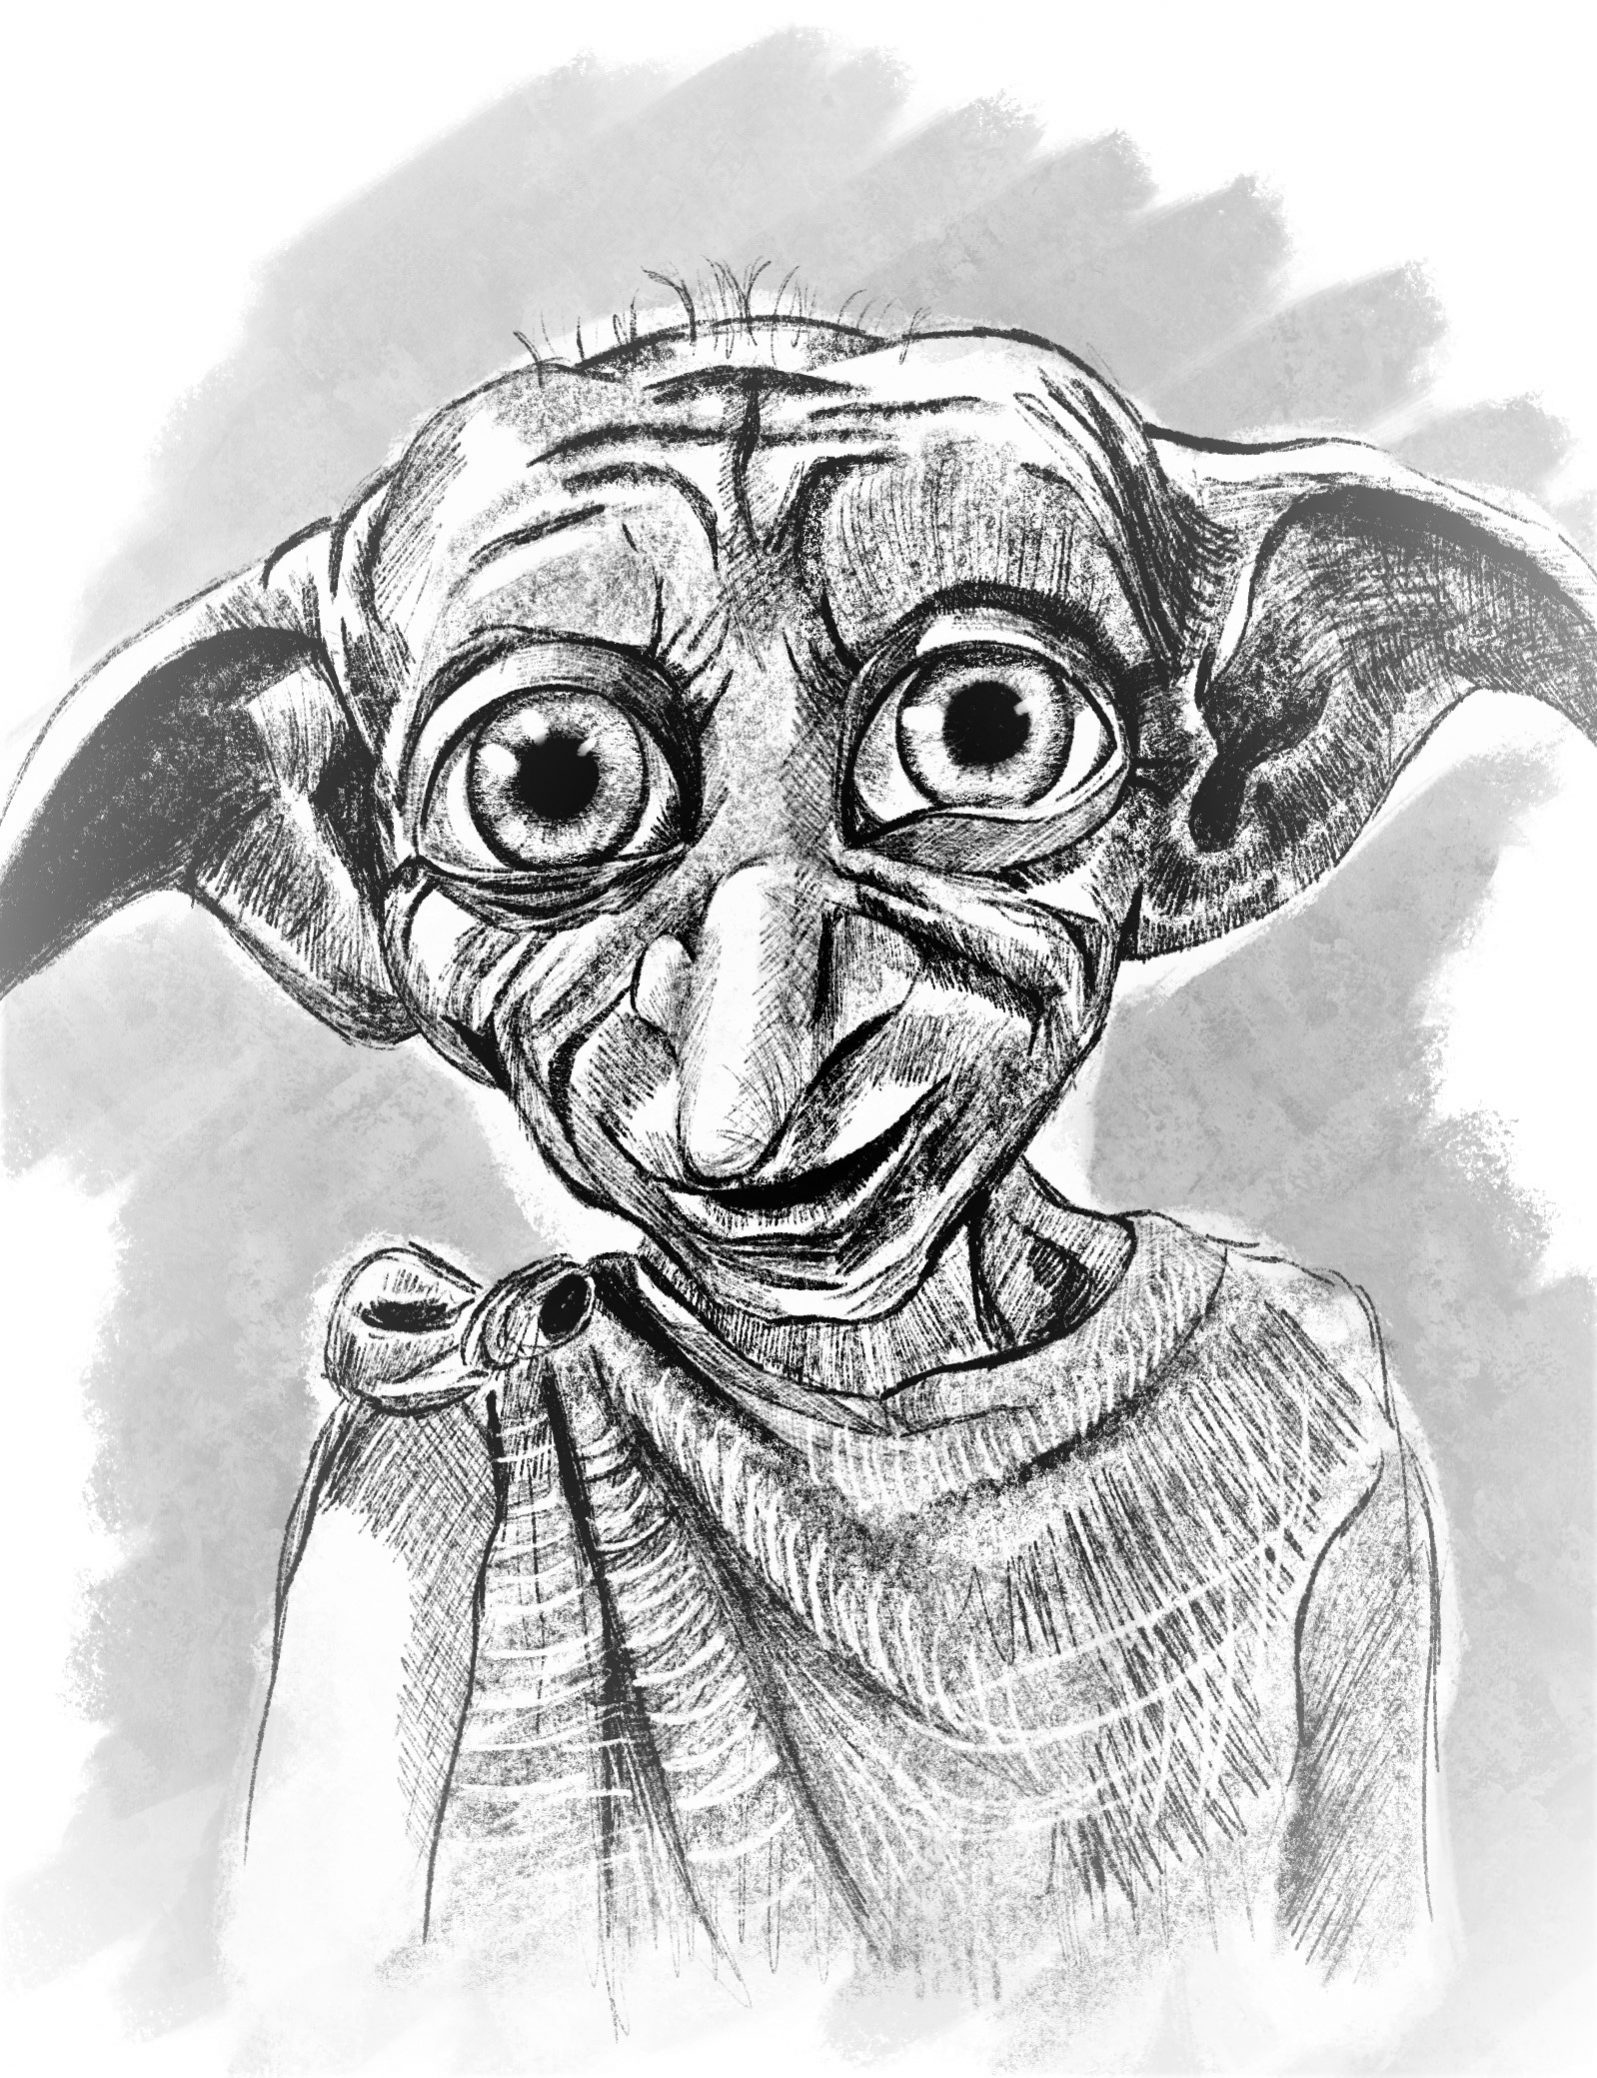 How to Draw a digital sketch of Dobby from Harry Potter